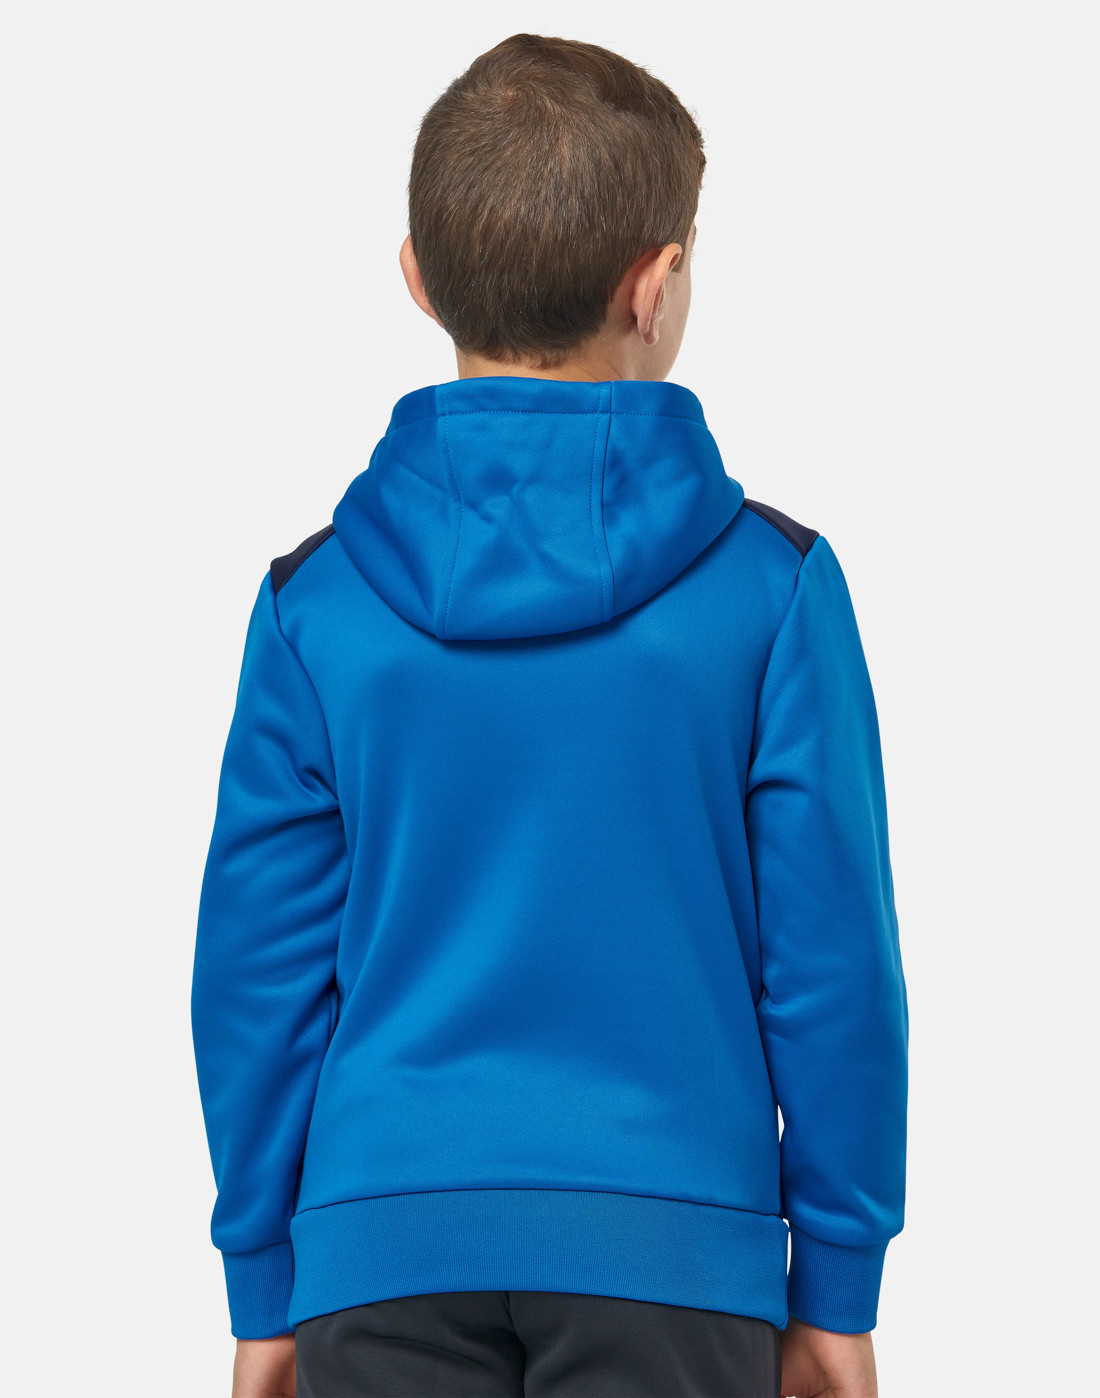 Castore Kids Leinster Hoodie - Blue | Life Style Sports IE